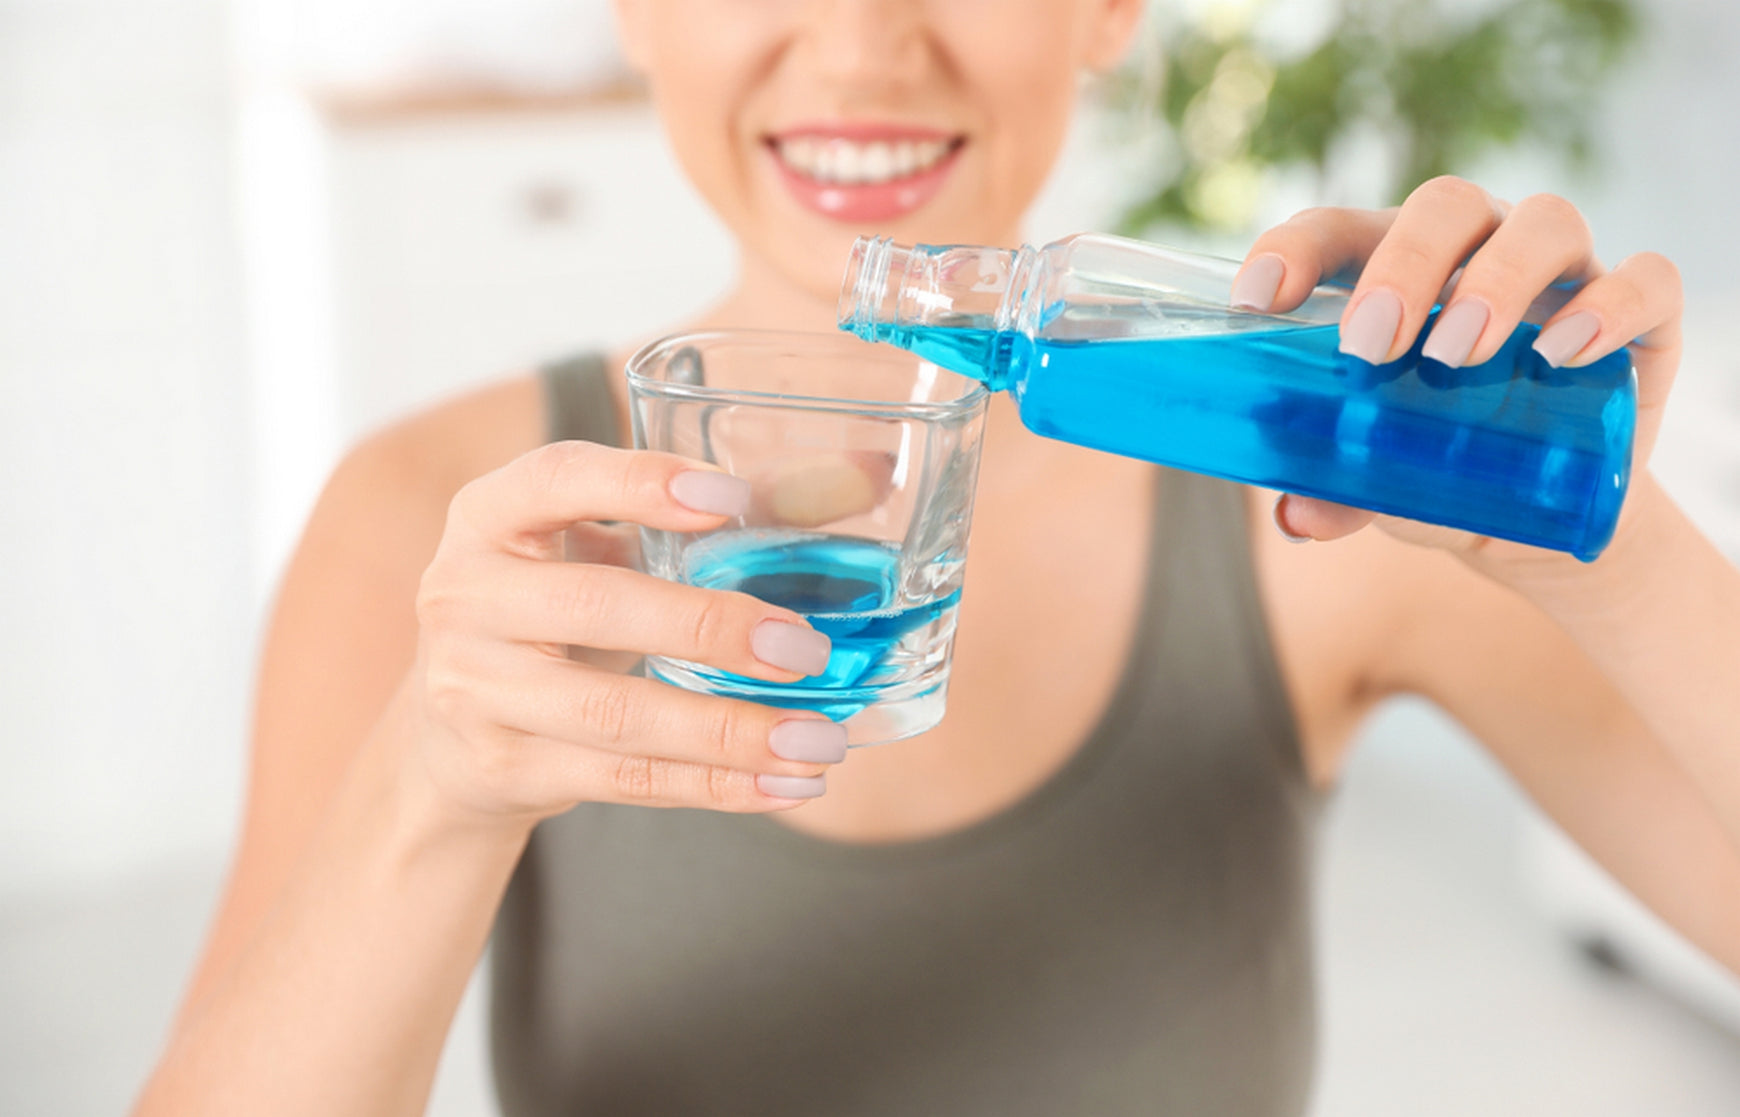 How to make a home-made mouthwash in case of infection?